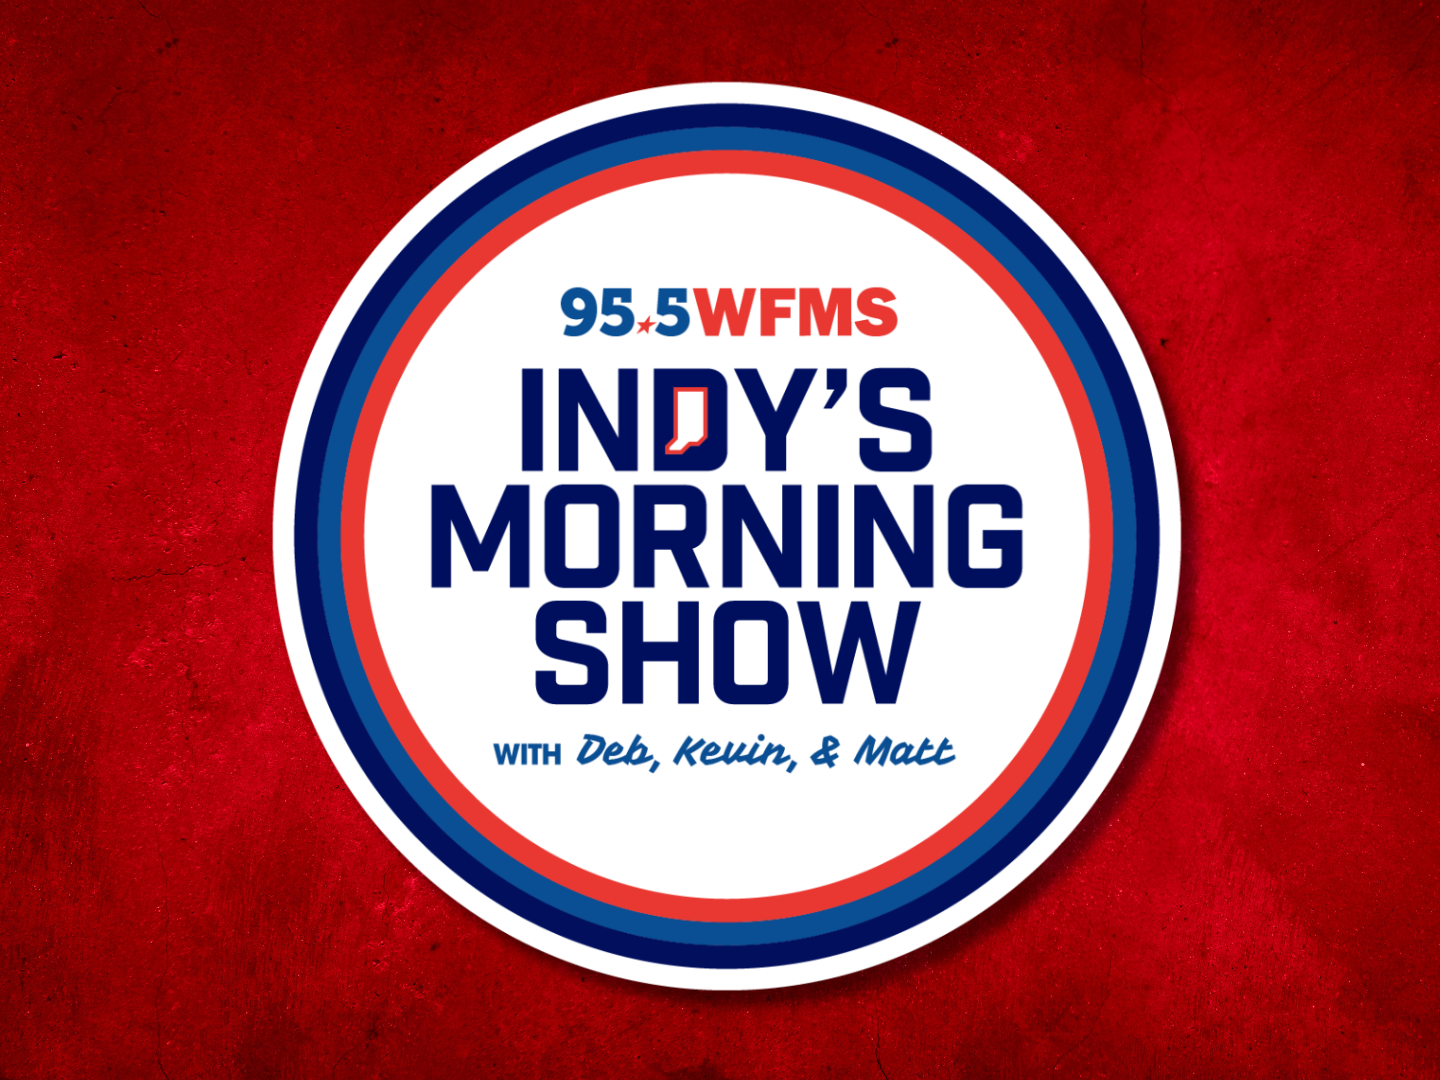 Tim McGraw Hangs With Indy's Morning Show